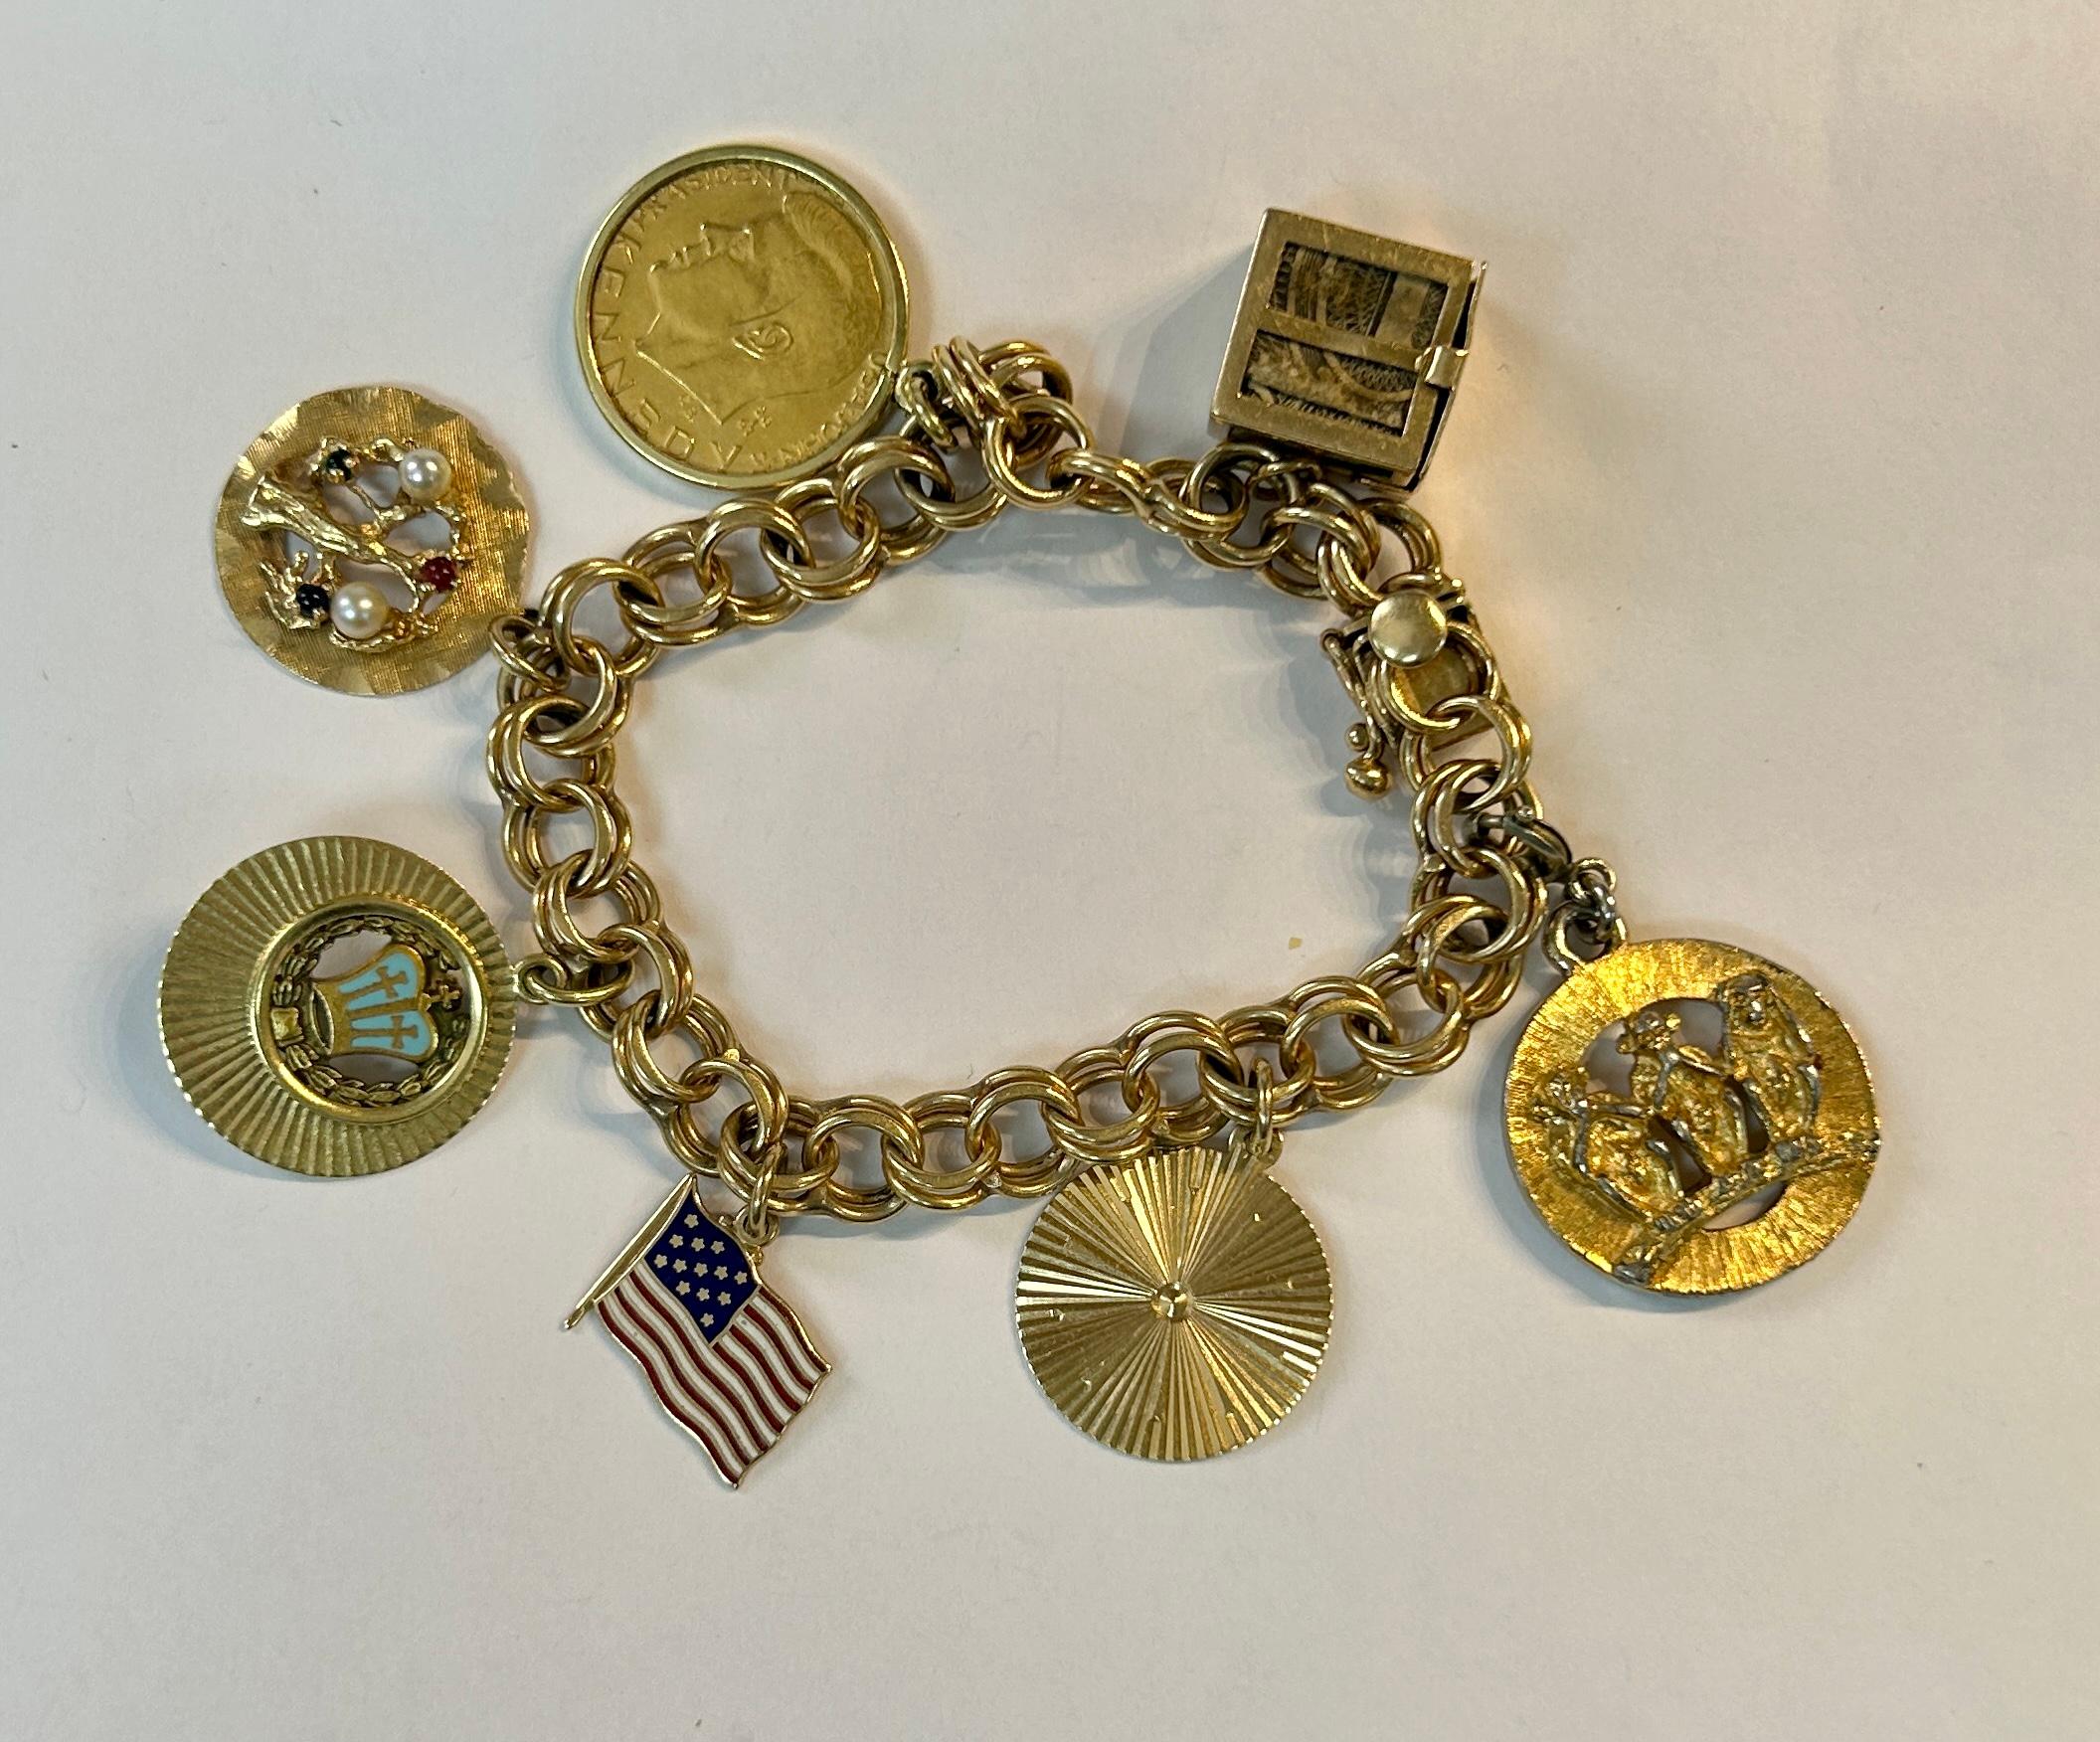 Women’s 14K yellow gold vintage charm bracelet with seven charms. One charm has small pearl, ruby, and sapphire stones. Other charms include gold Kennedy coin, a money bundle, a group of monkeys (see no, hear no, speaks no-evil). Very unique and a